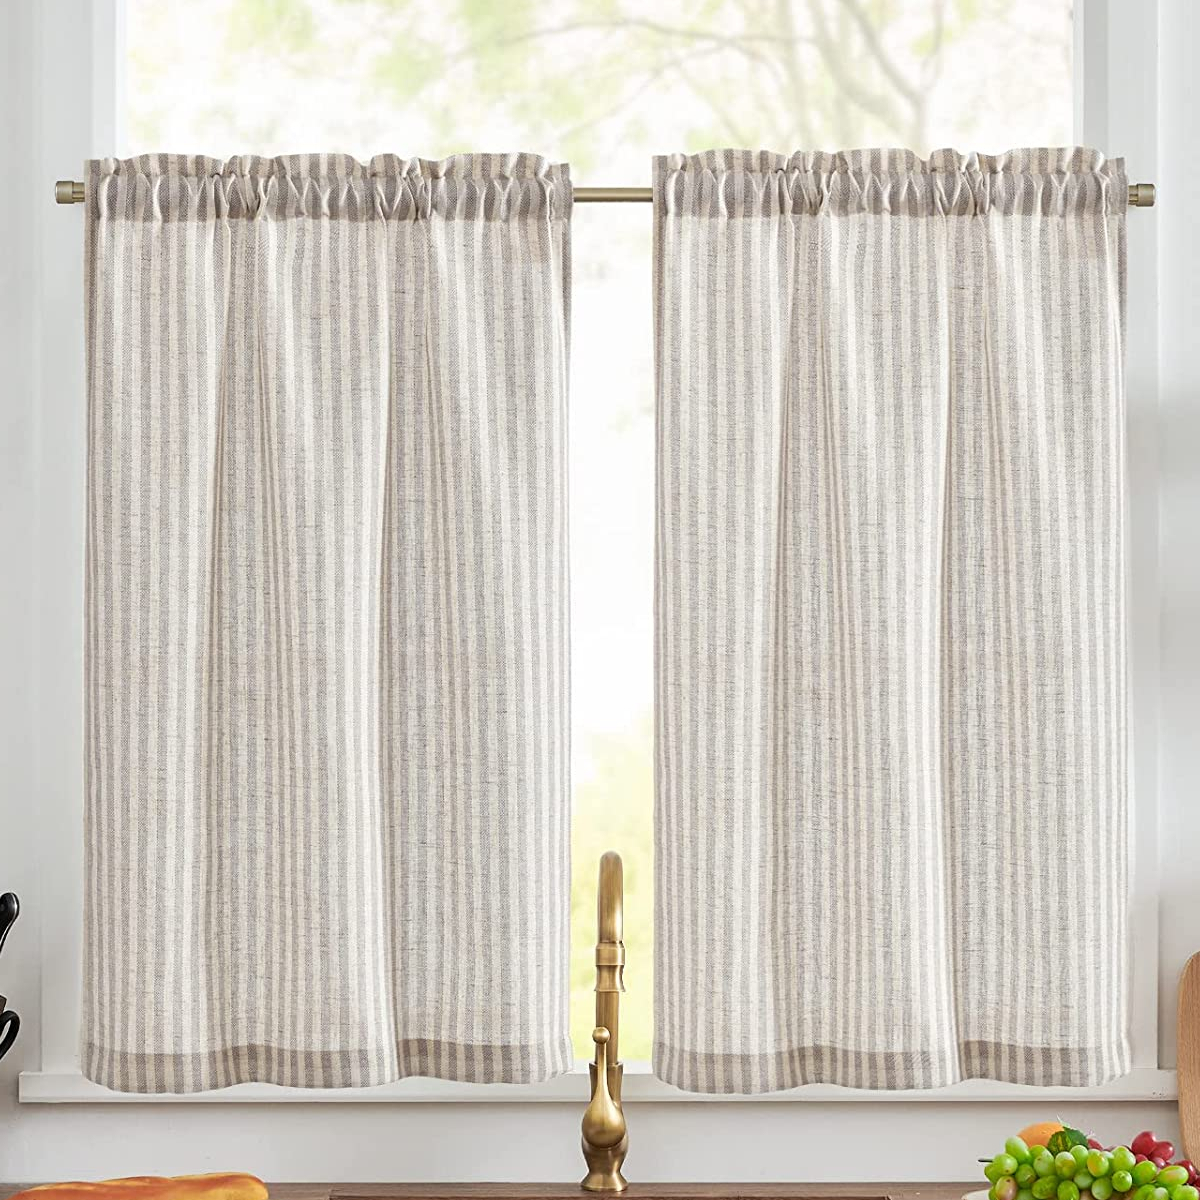 White striped cafe curtains hanging over a kitchen window